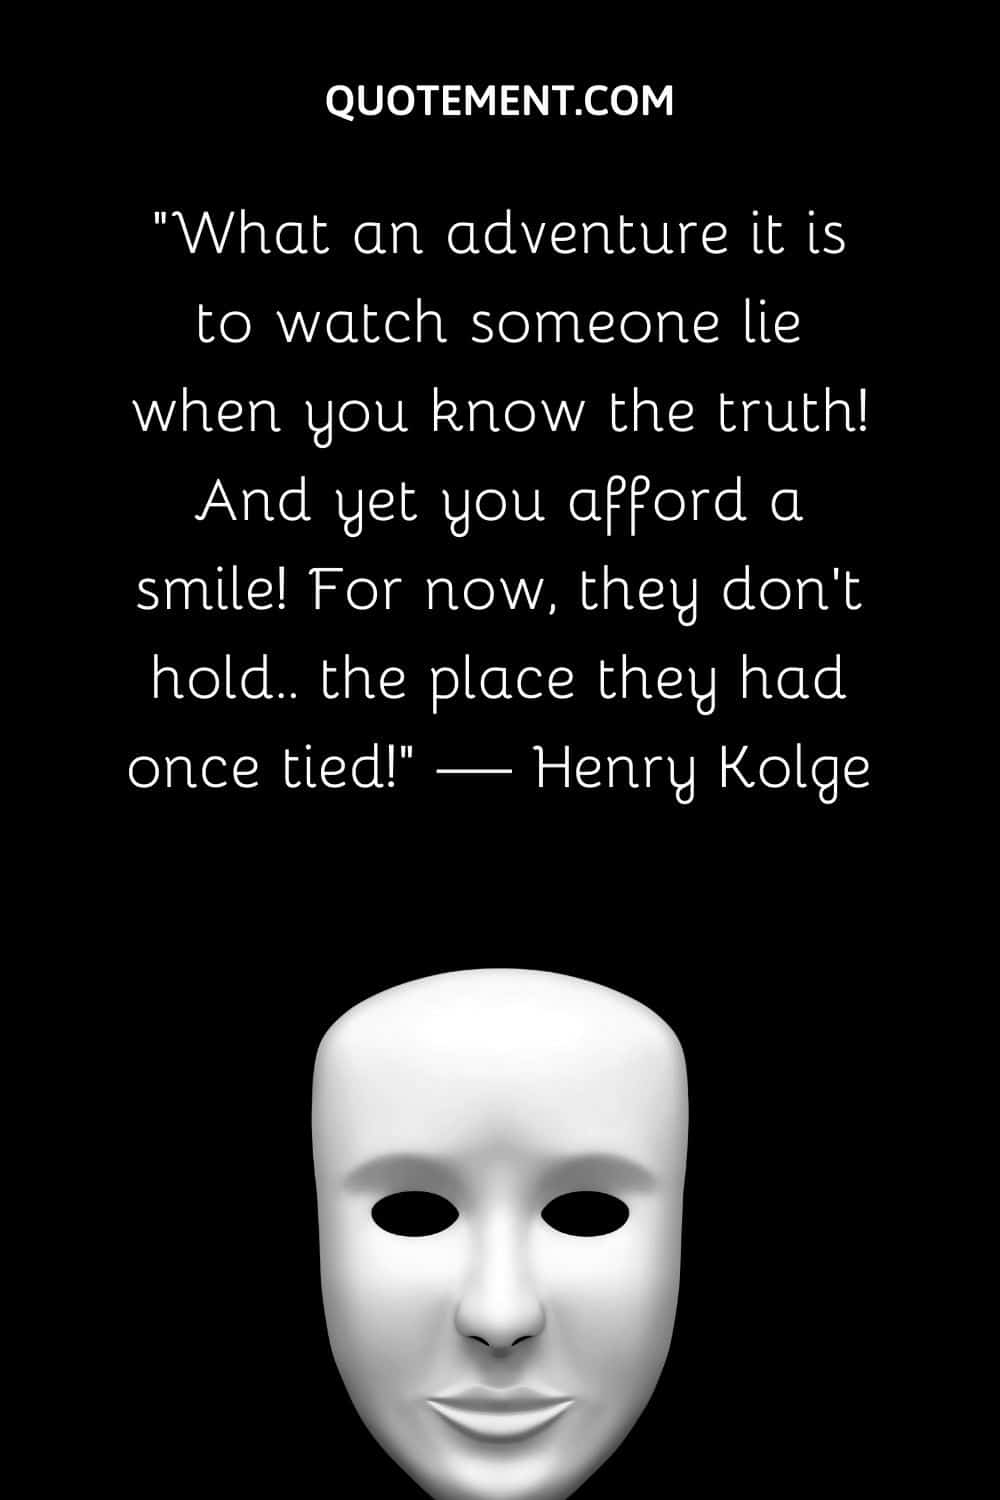 What an adventure it is to watch someone lie when you know the truth